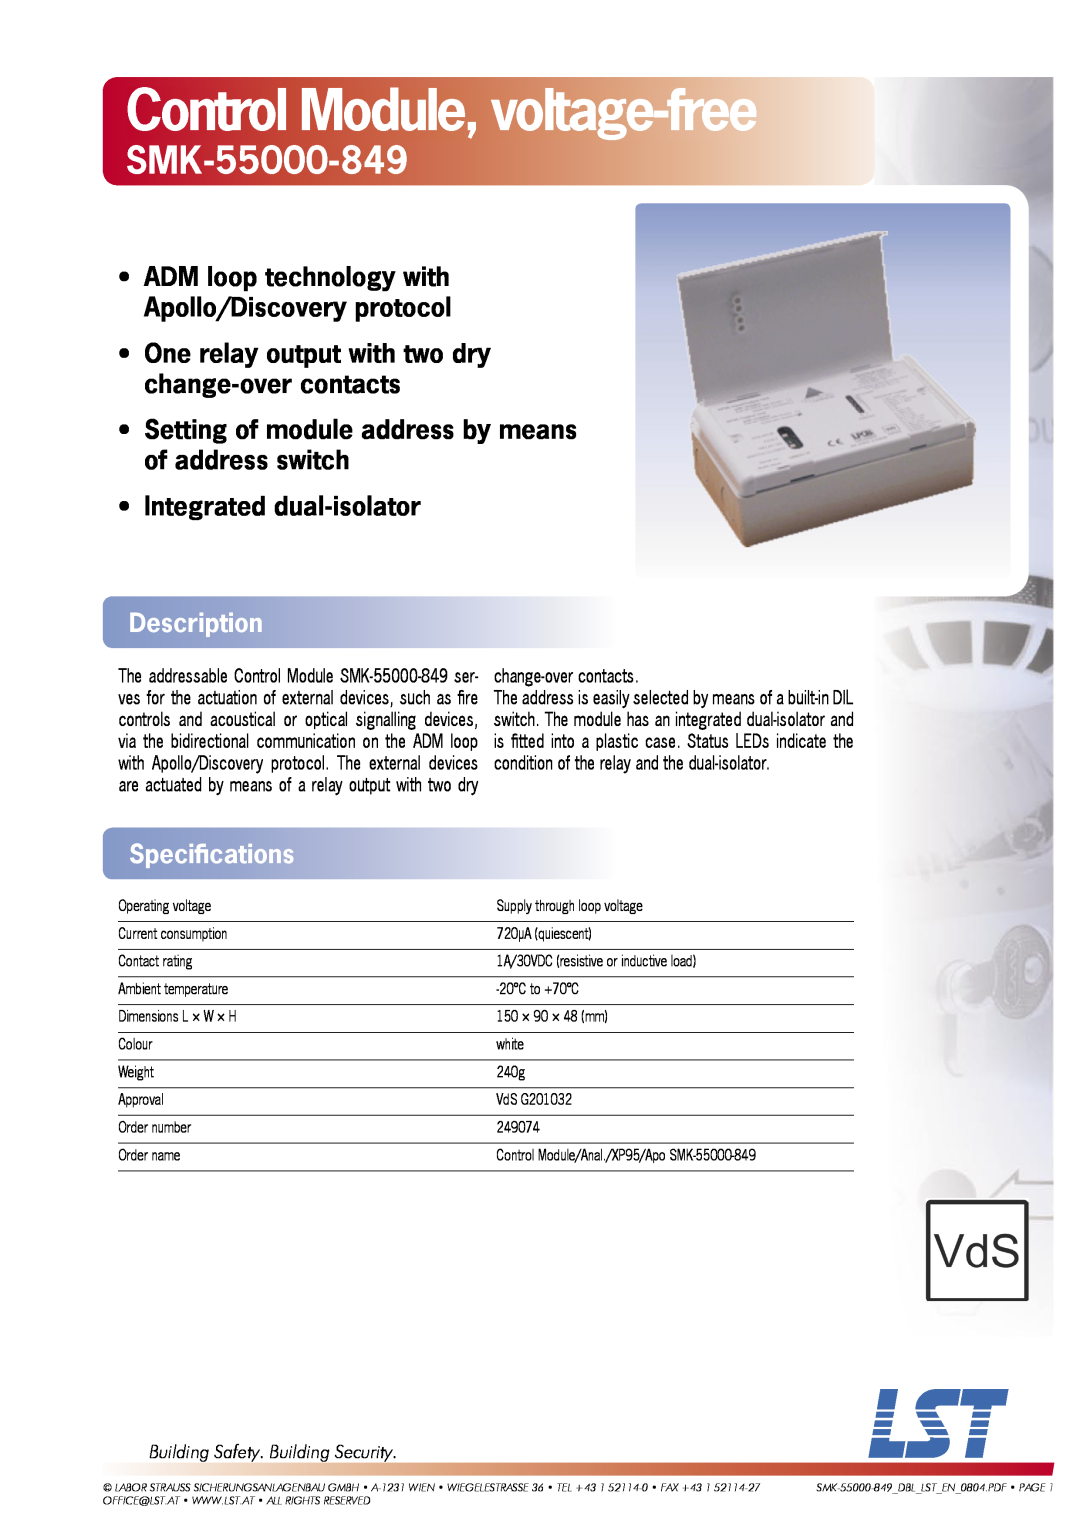 LST SMK-55000-849 specifications Control Module, voltage-free, Integrated dual-isolator, Description, Speciﬁcations 